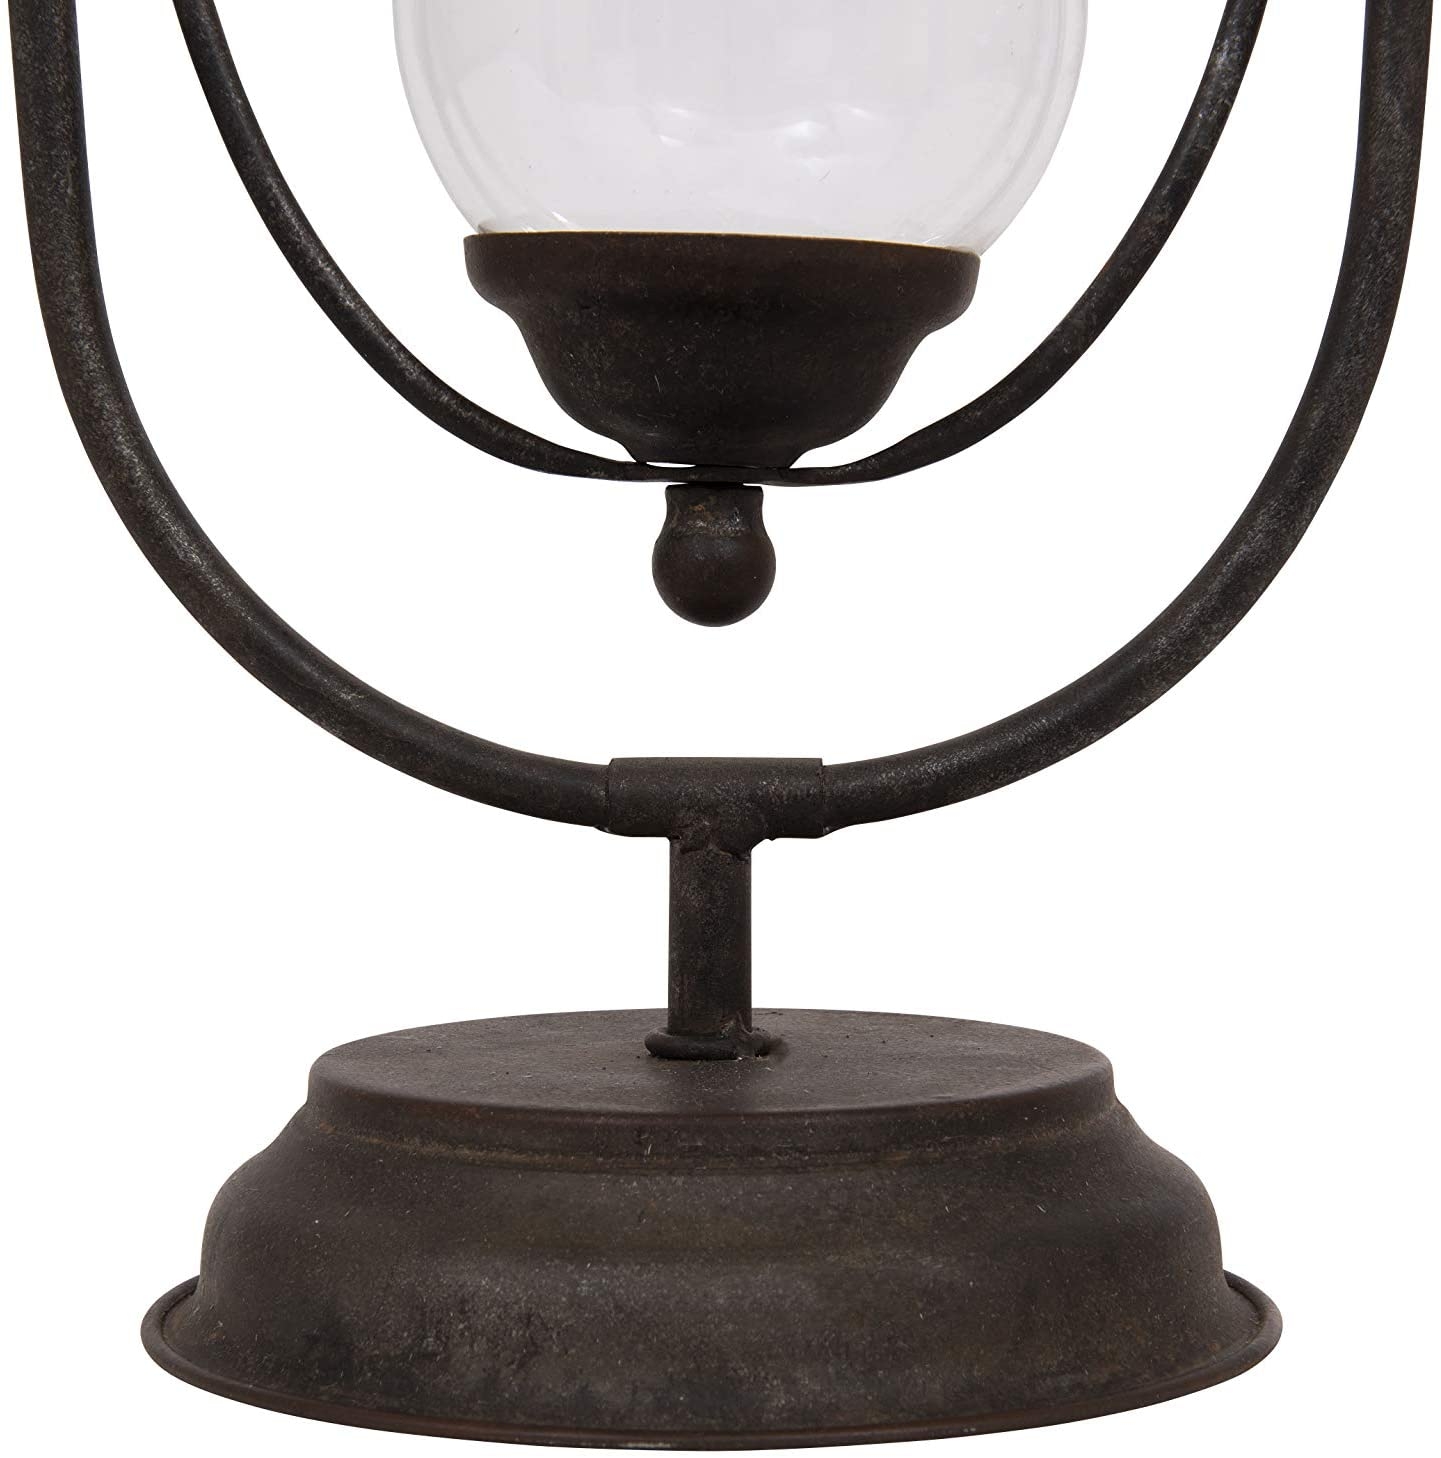 Decorative Rust Color Metal Hourglass with White Sand - Image 3